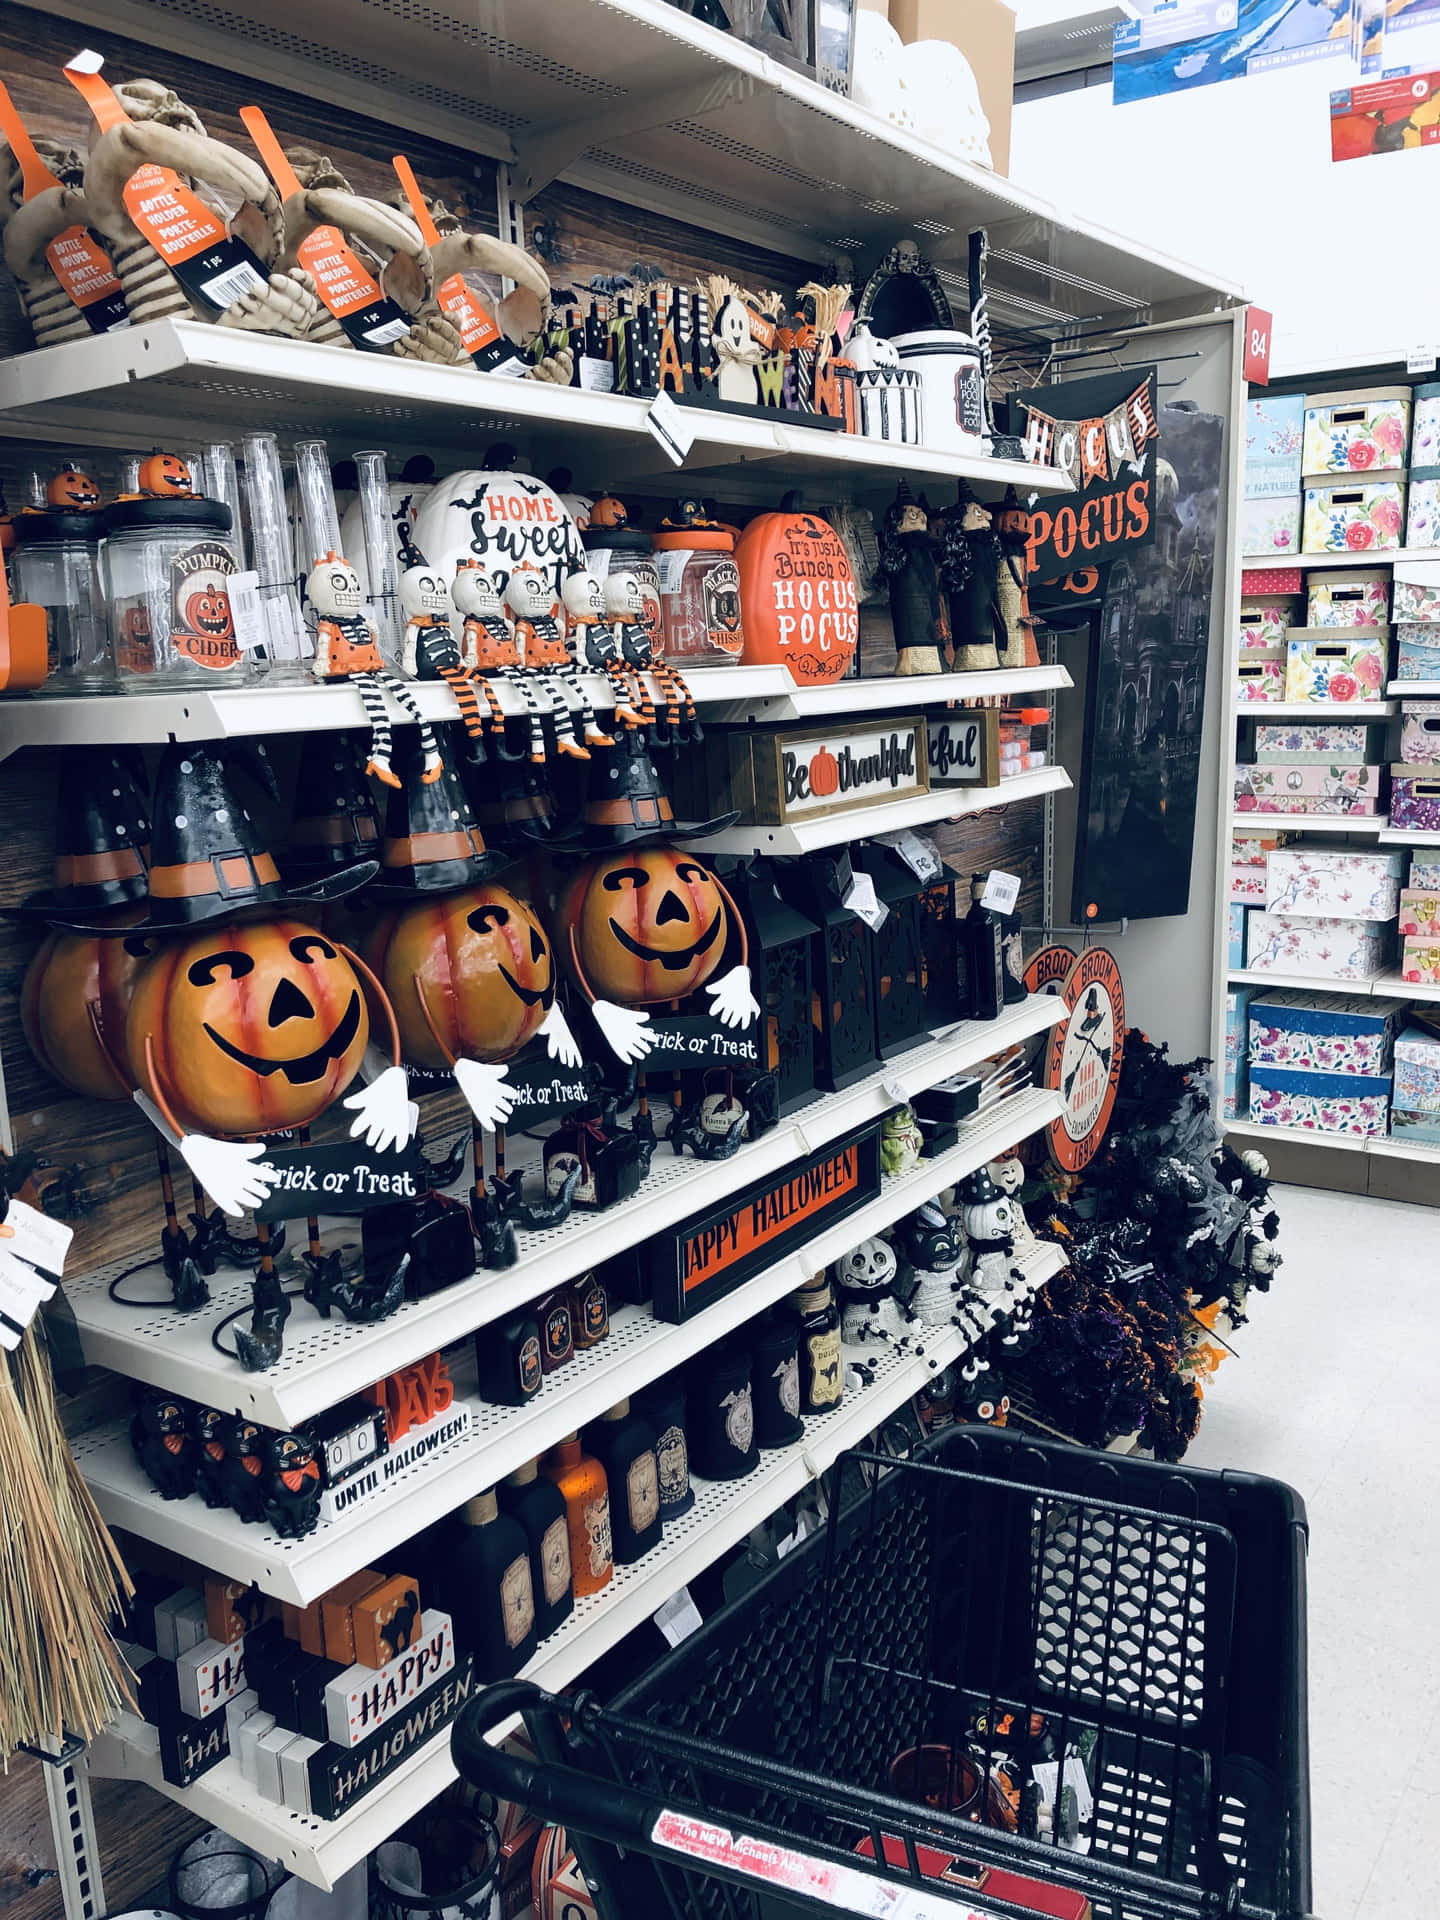 "Celebrate the spookiest season with a fun and eerie Halloween aesthetic".